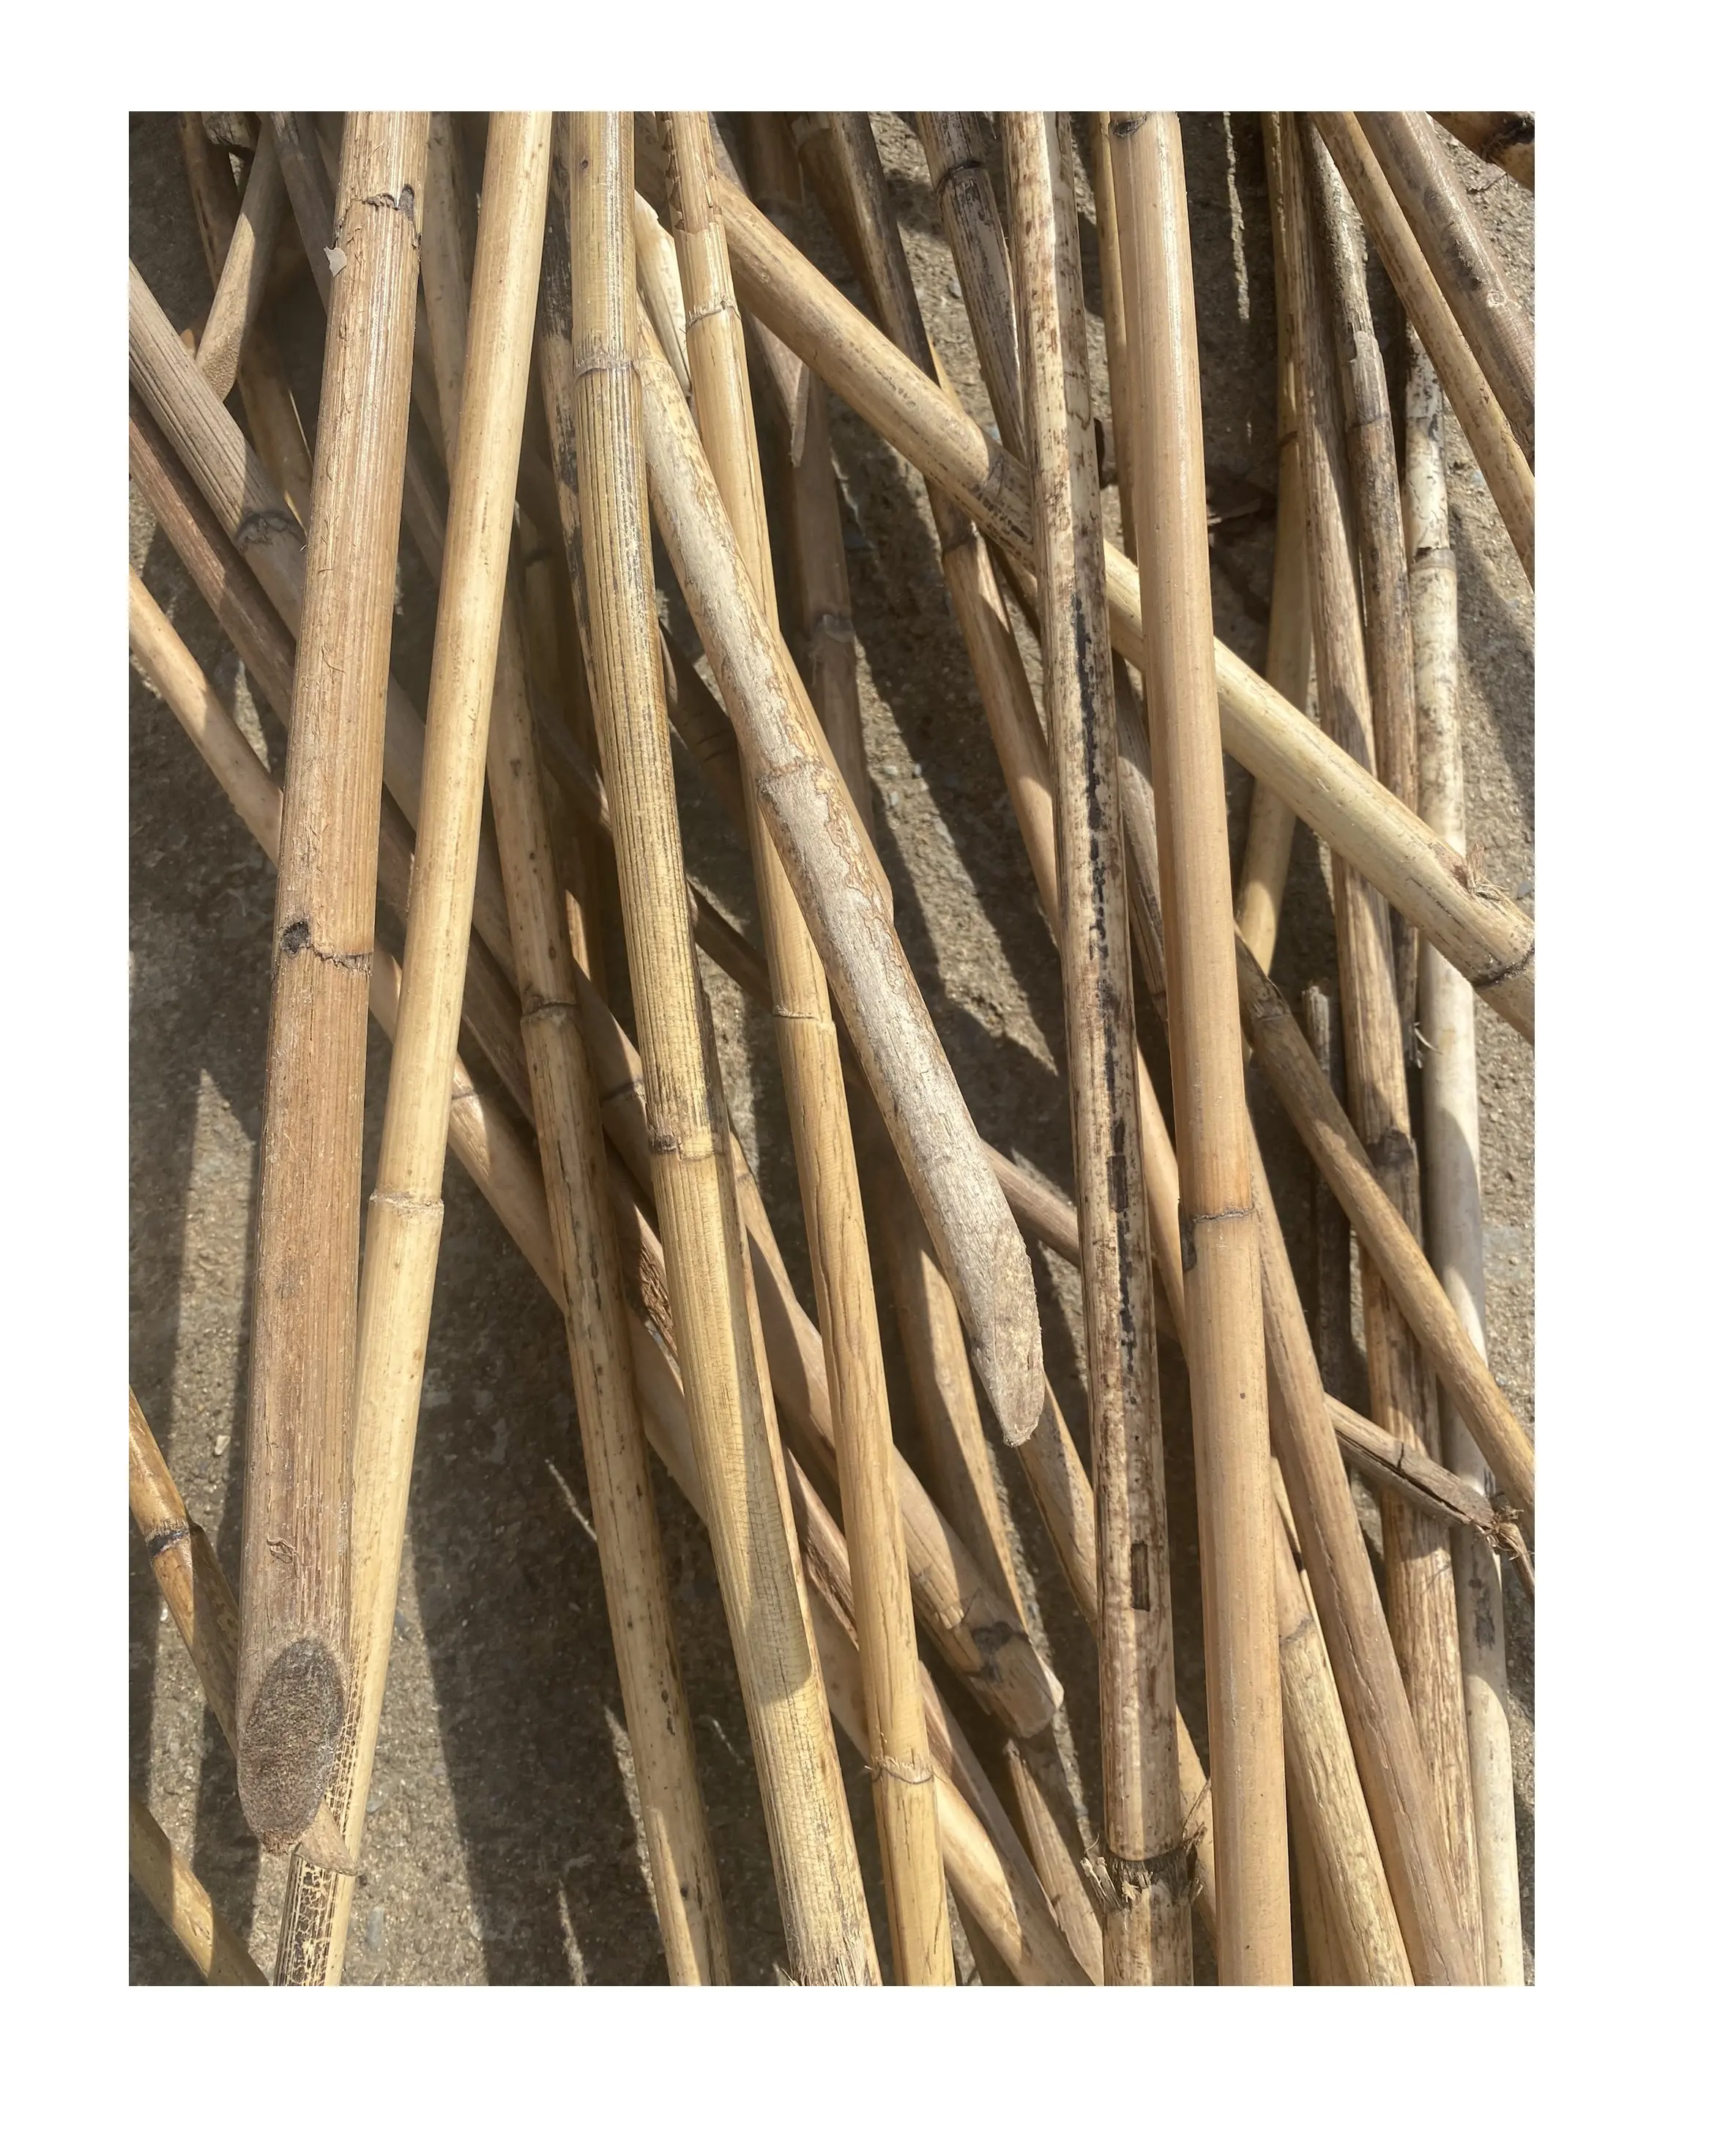 Natural Rattan Cane/ Polished Rattan Manau Poles Material for making furniture and handicraft